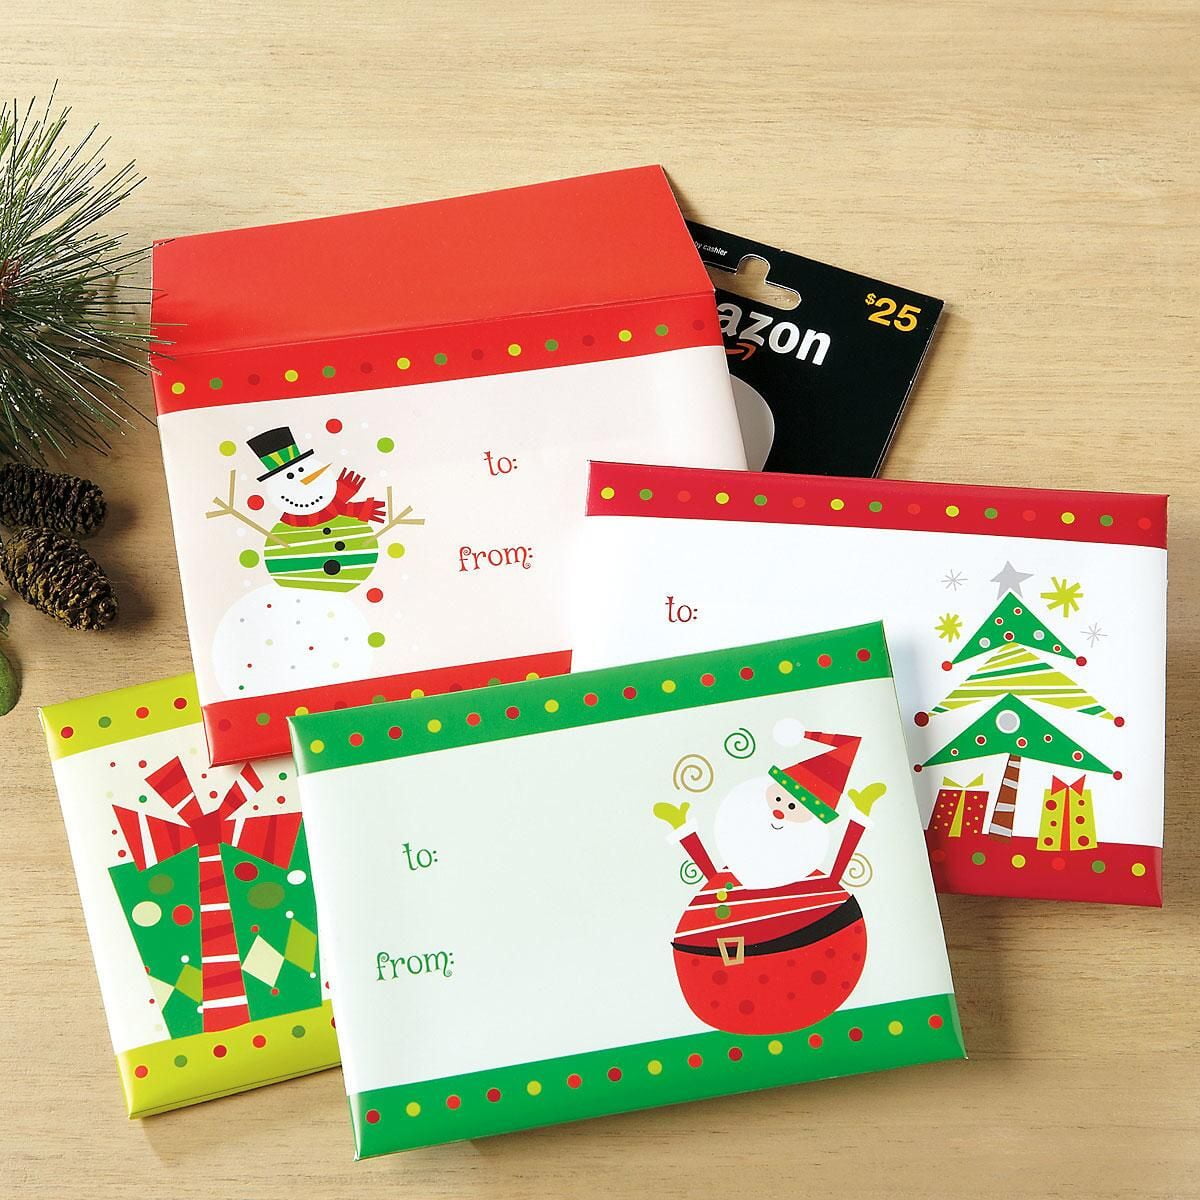 Details about   Set of 6 American Greeting Christmas Money Gift Card Holder Especially For U NEW 